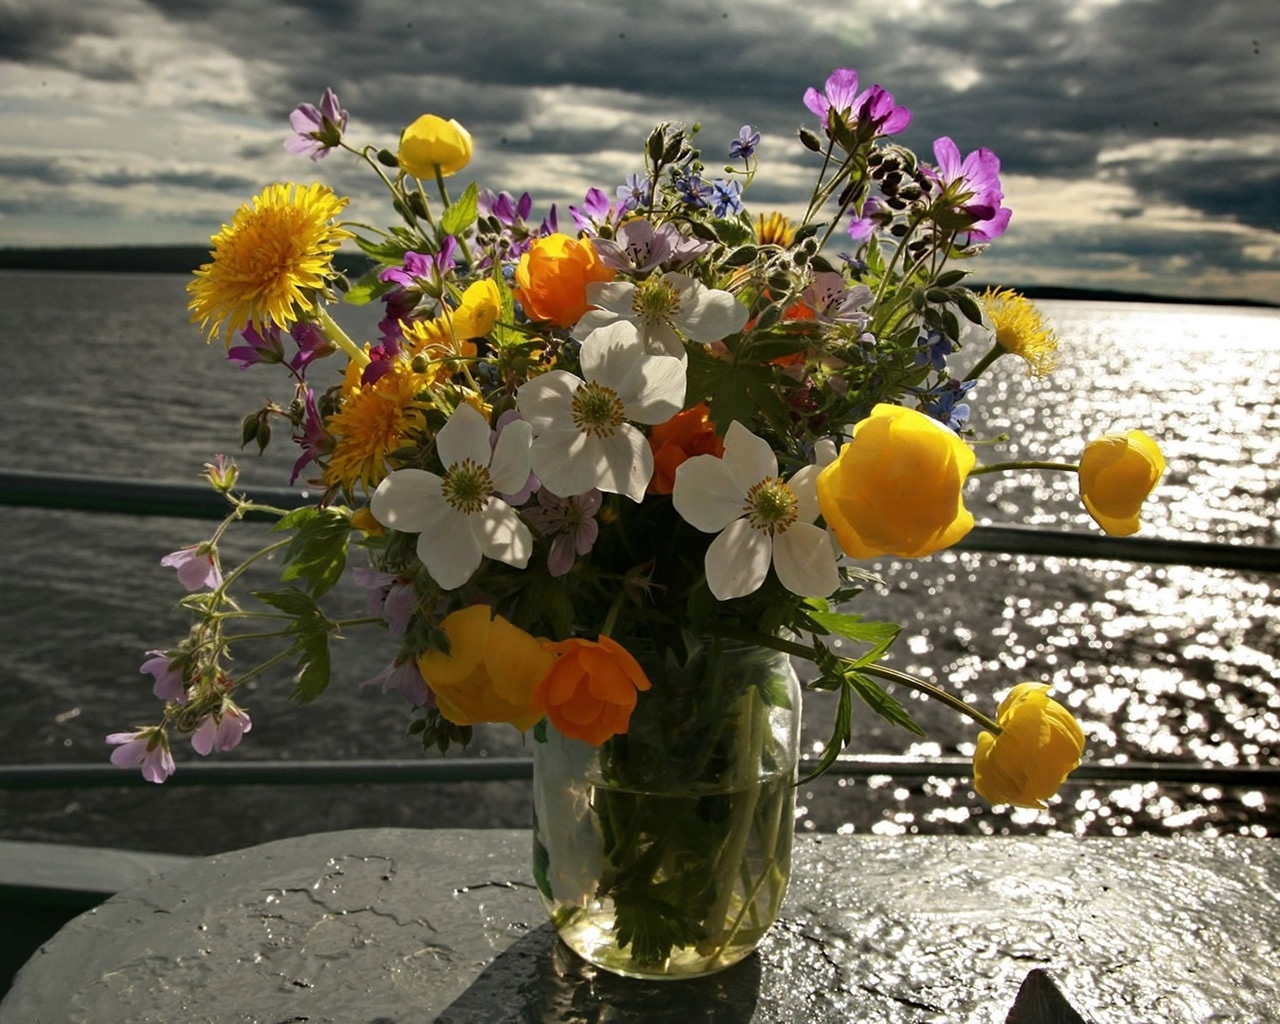 Flowers by the Sea for 1280 x 1024 resolution